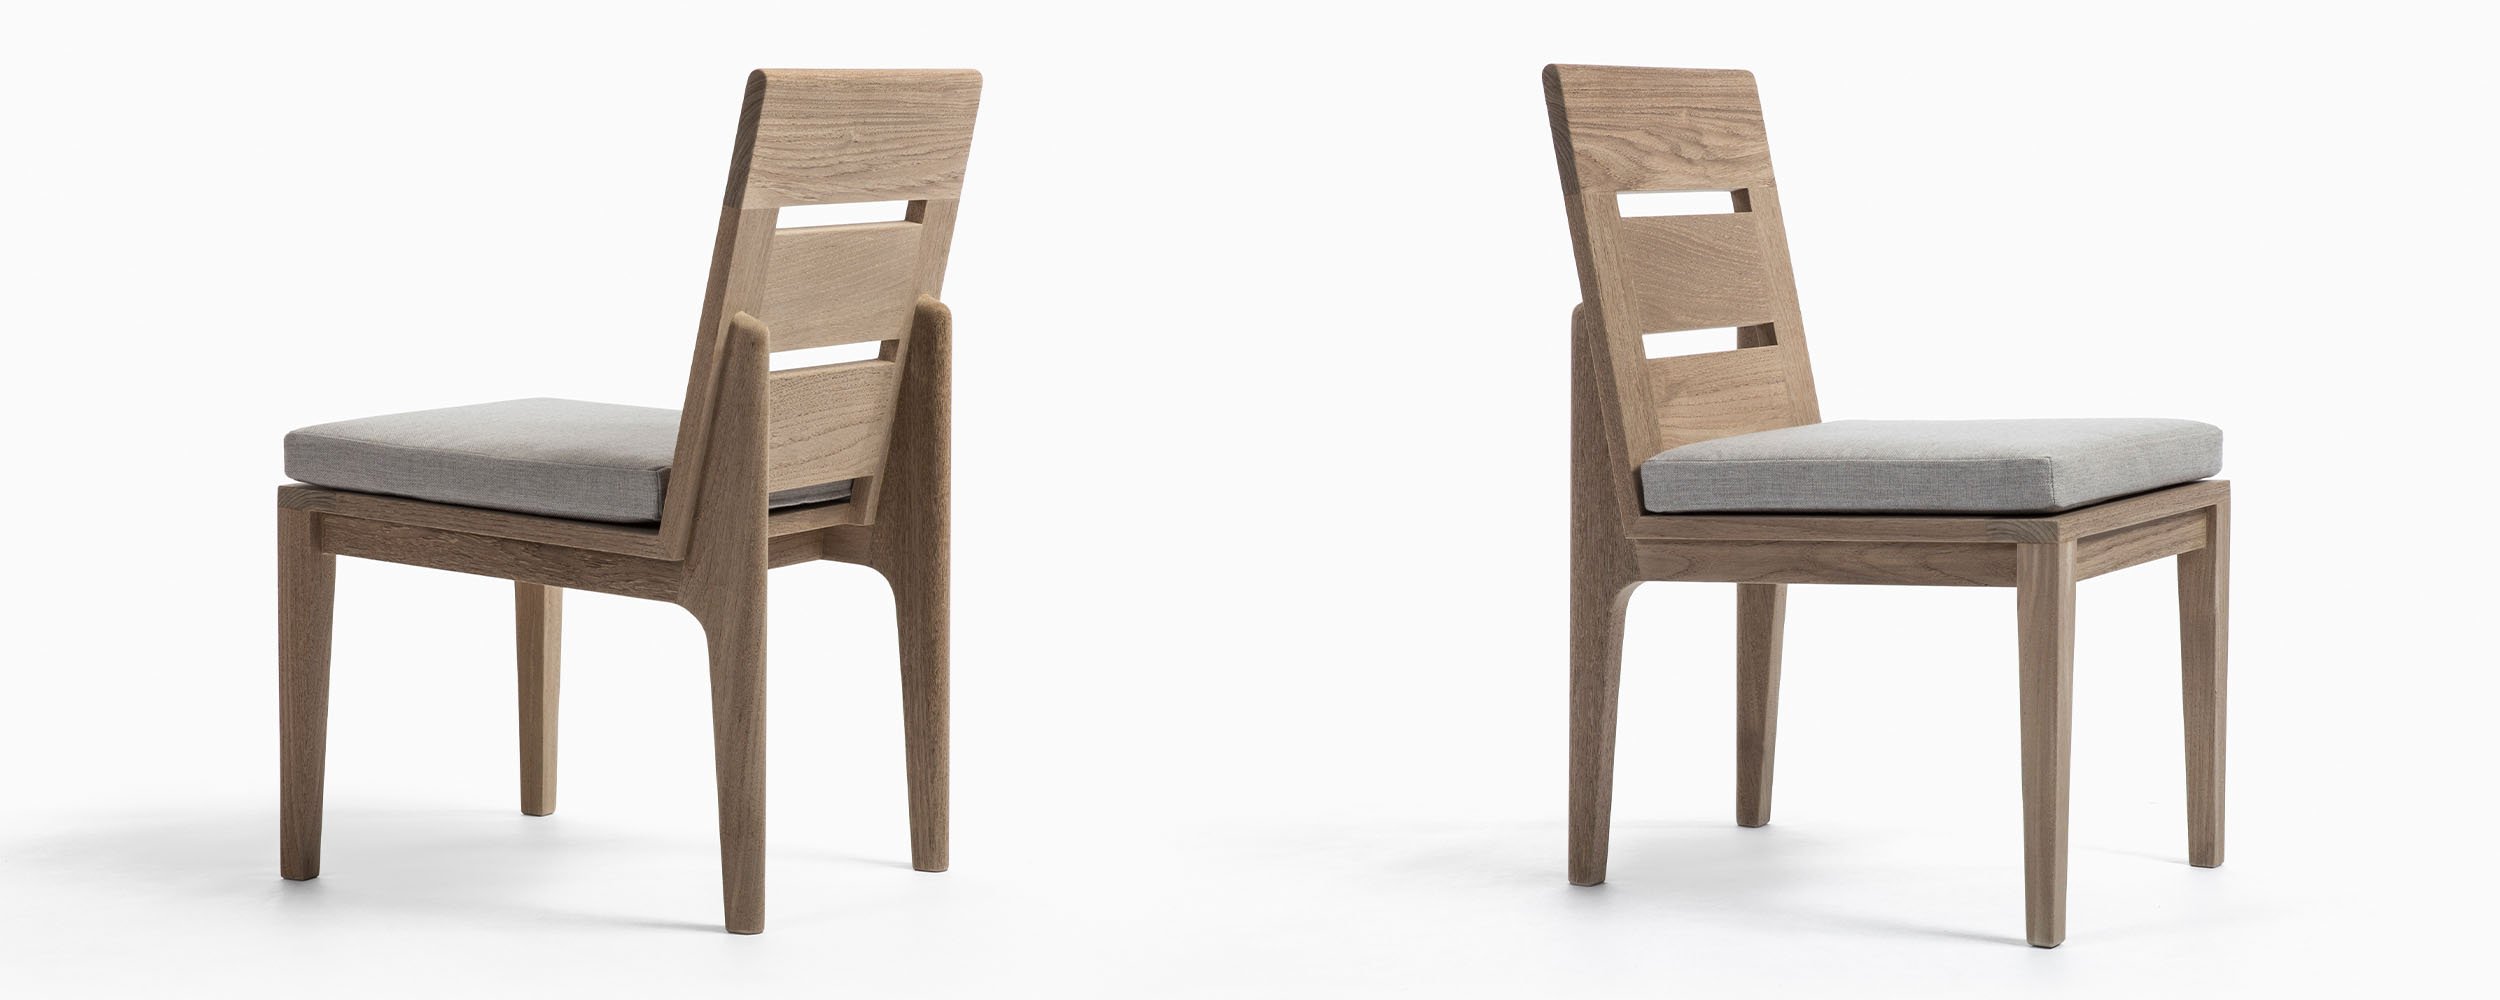 Bombay Dining Side Chair